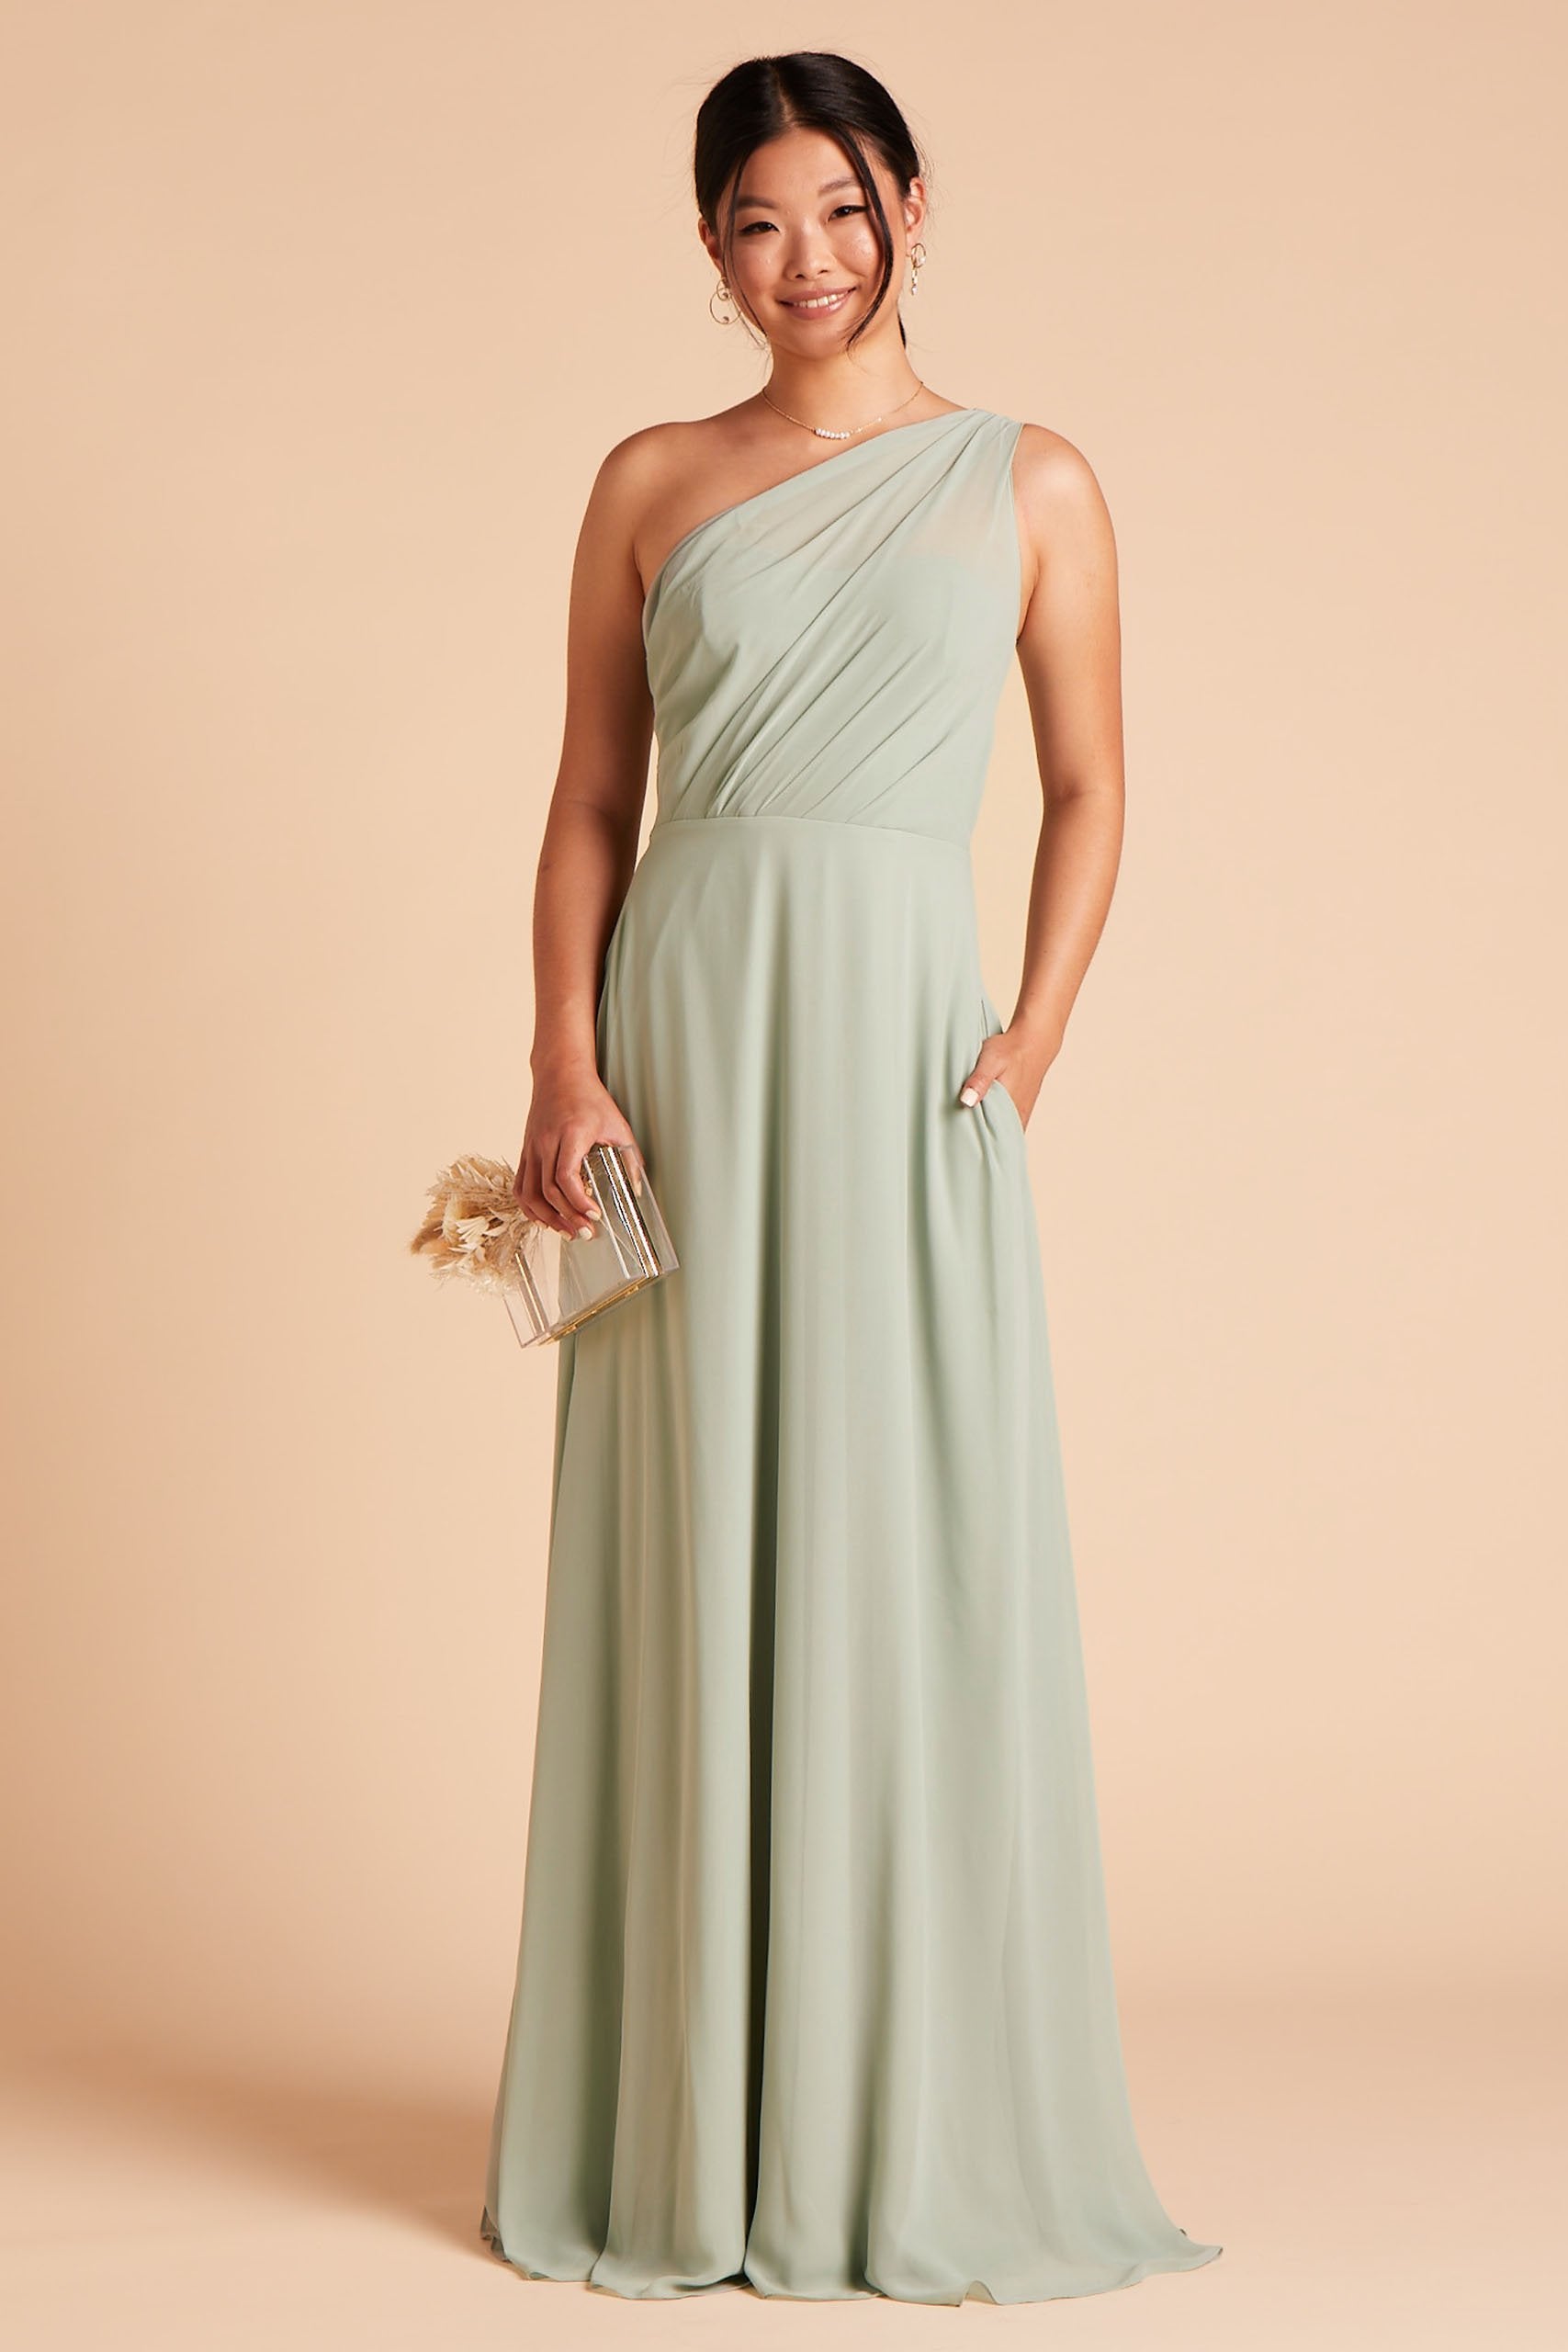 Front view of the Kira Dress in sage chiffon without the optional slit shows a slender model with a medium skin tone wearing an asymmetrical one-shoulder, full-length dress. Soft pleating gathers at the left shoulder of the bodice with a smooth fit at the waist as the dress skirt with a slight A-line silhouette flows to the floor.